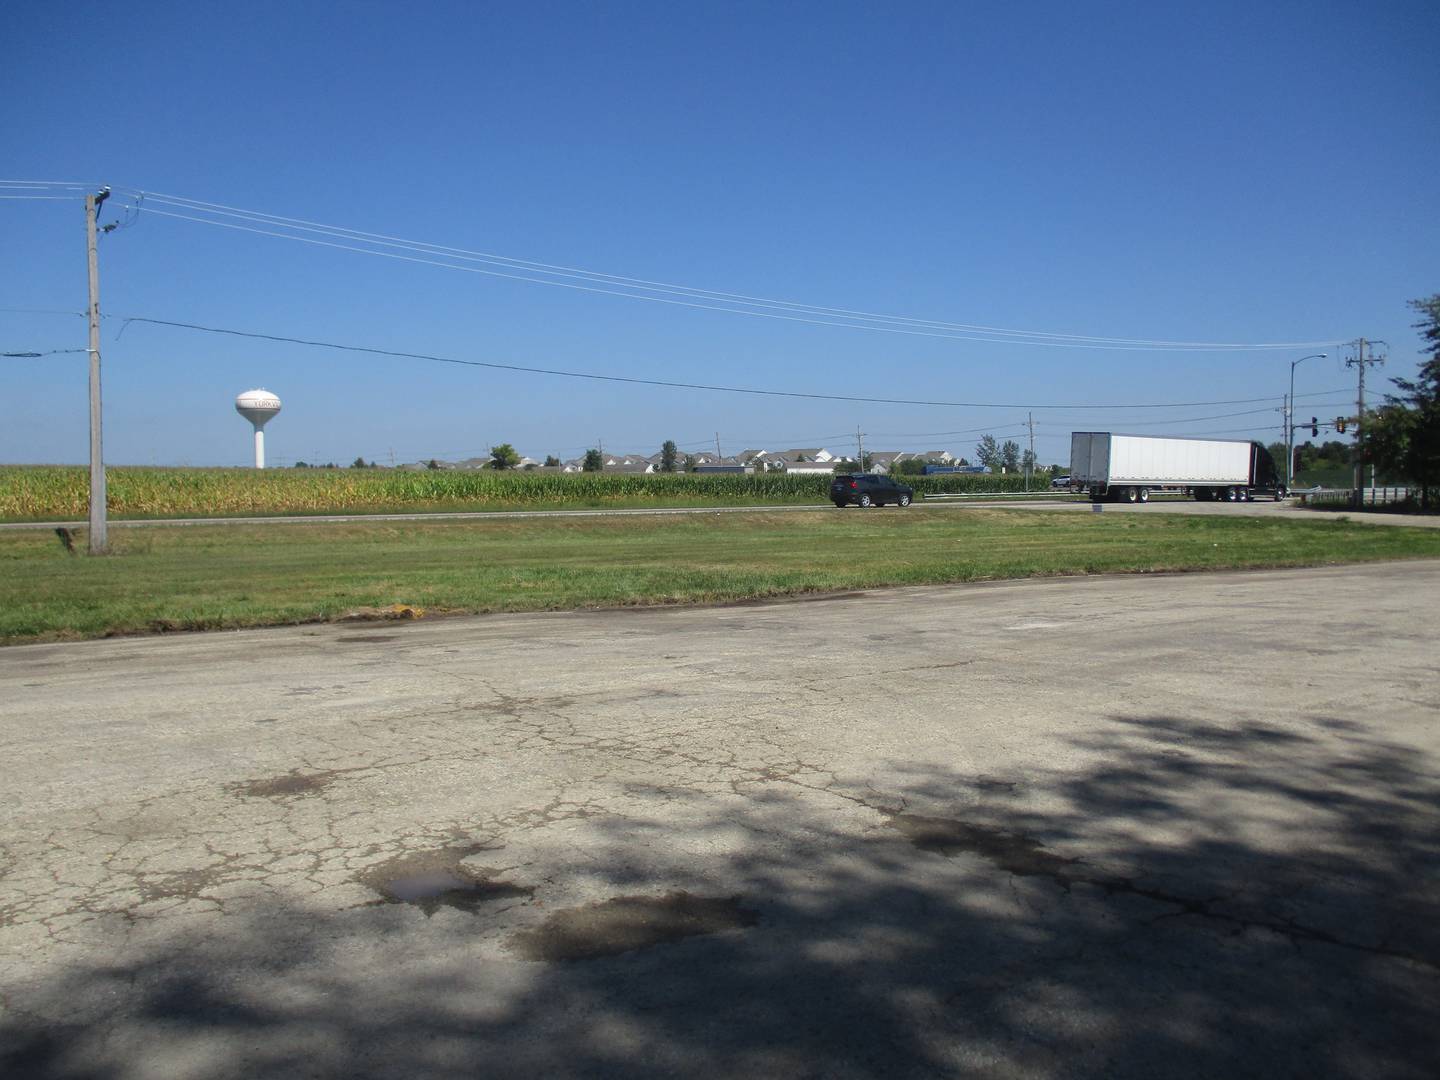 Kendall County plans to build a facility for the Kendall Area Transit bus service on this piece of property at the southwest corner of Route 47 and Galena Road in Yorkville. The site is seen here looking northeast.